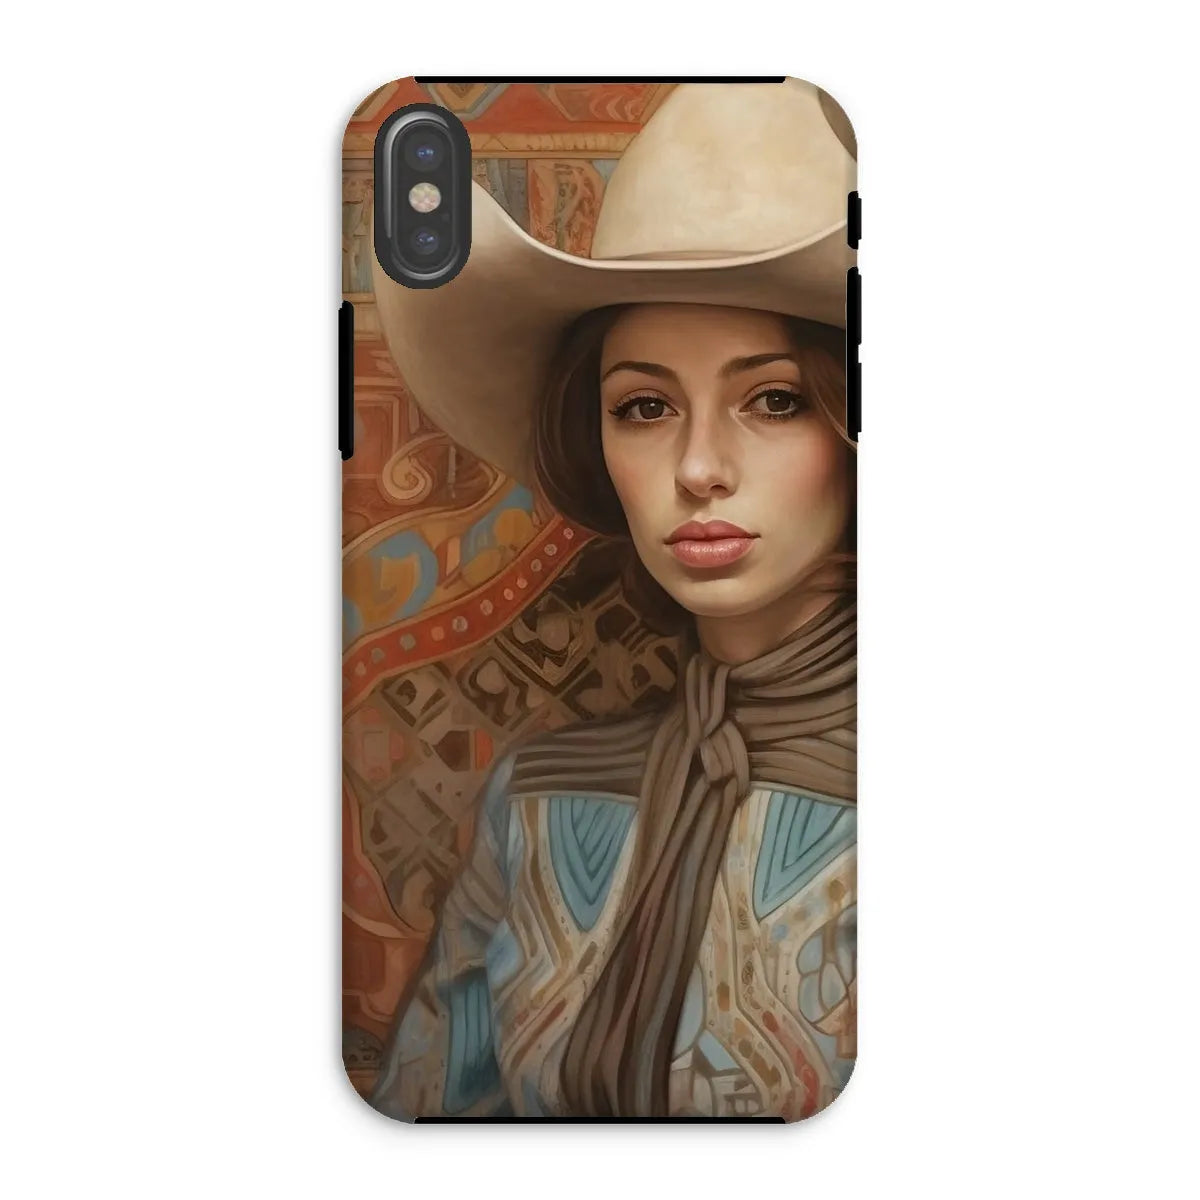 Anahita The Lesbian Cowgirl - Sapphic Art Phone Case - Iphone Xs / Matte - Mobile Phone Cases - Aesthetic Art